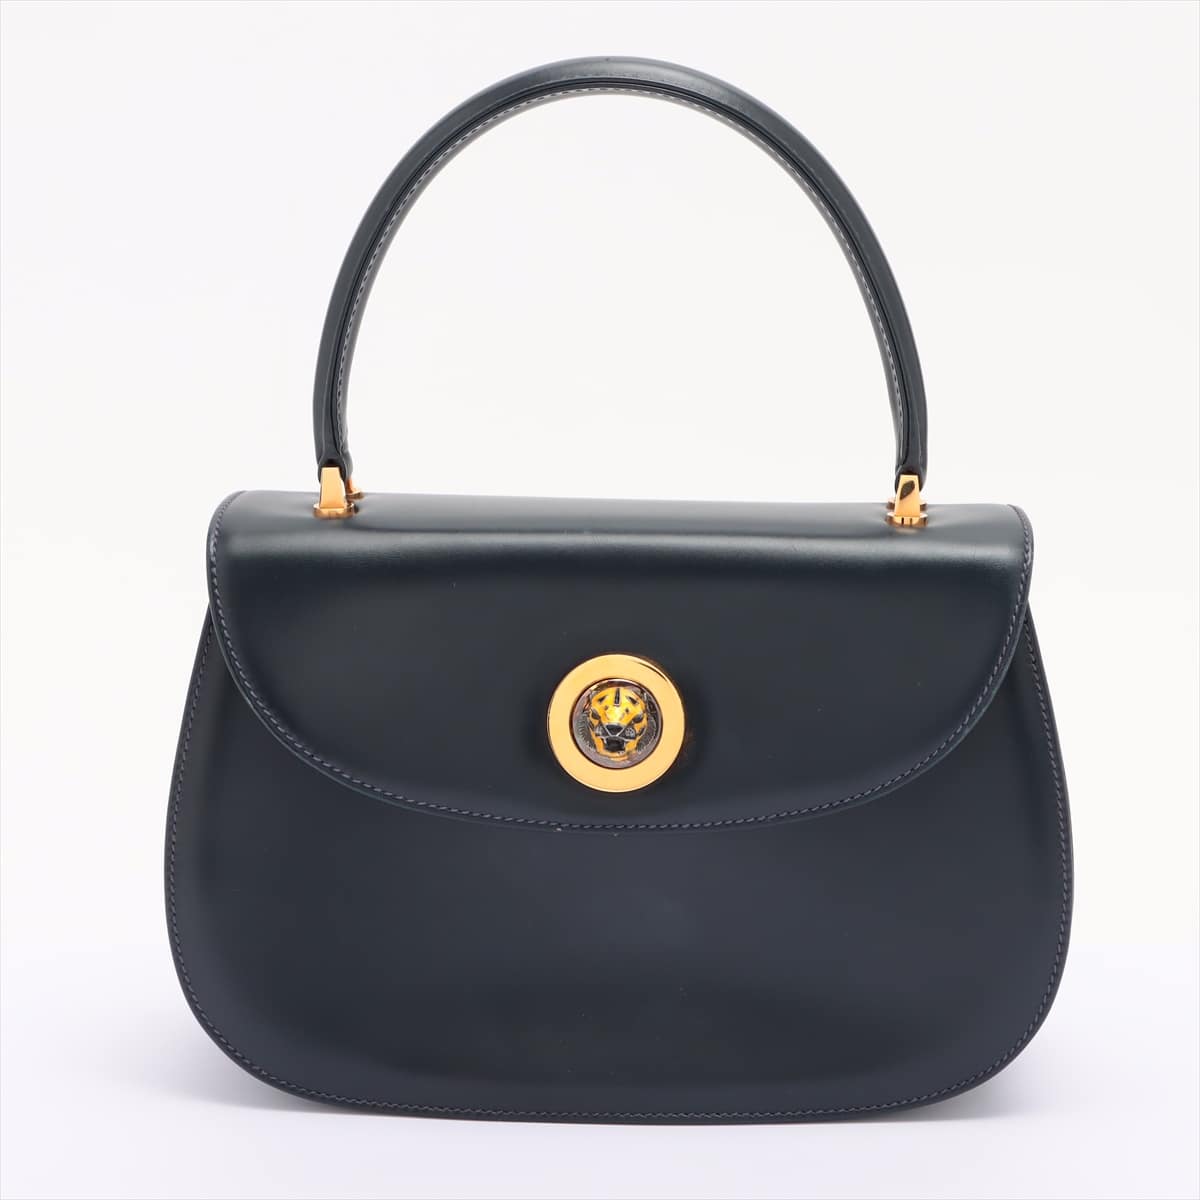 Gucci Old Gucci Leather Hand bag Navy blue